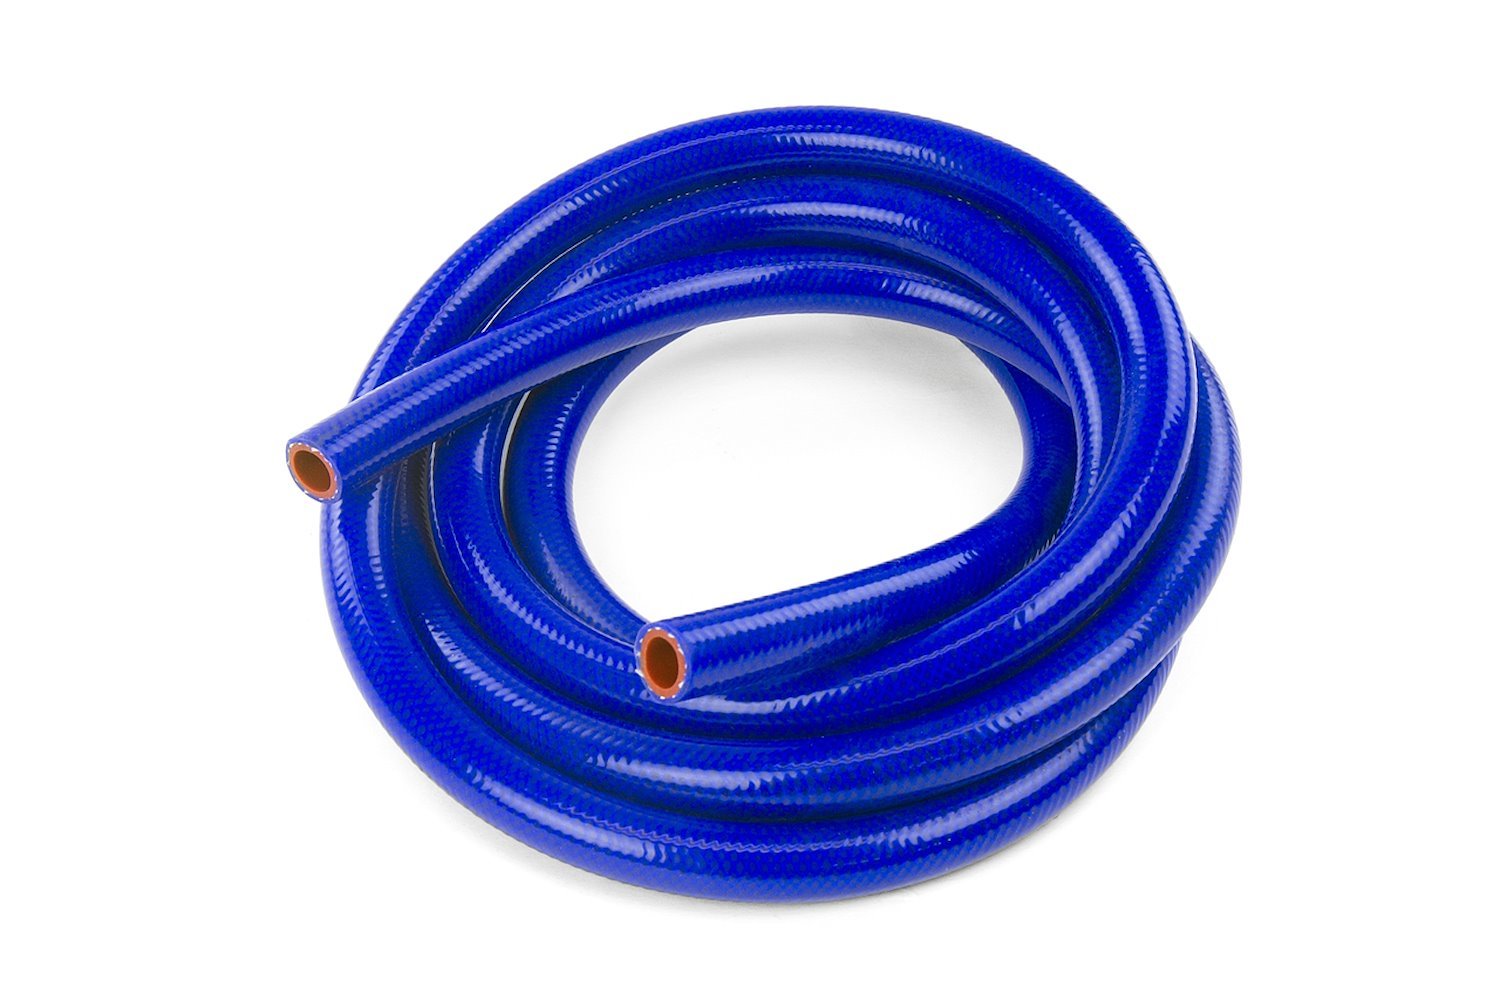 HTHH-025-BLUEx10 Silicone Heater Hose Tubing, High-Temp 1-Ply Reinforced, 1/4 in. ID, 10 ft. Roll, Blue